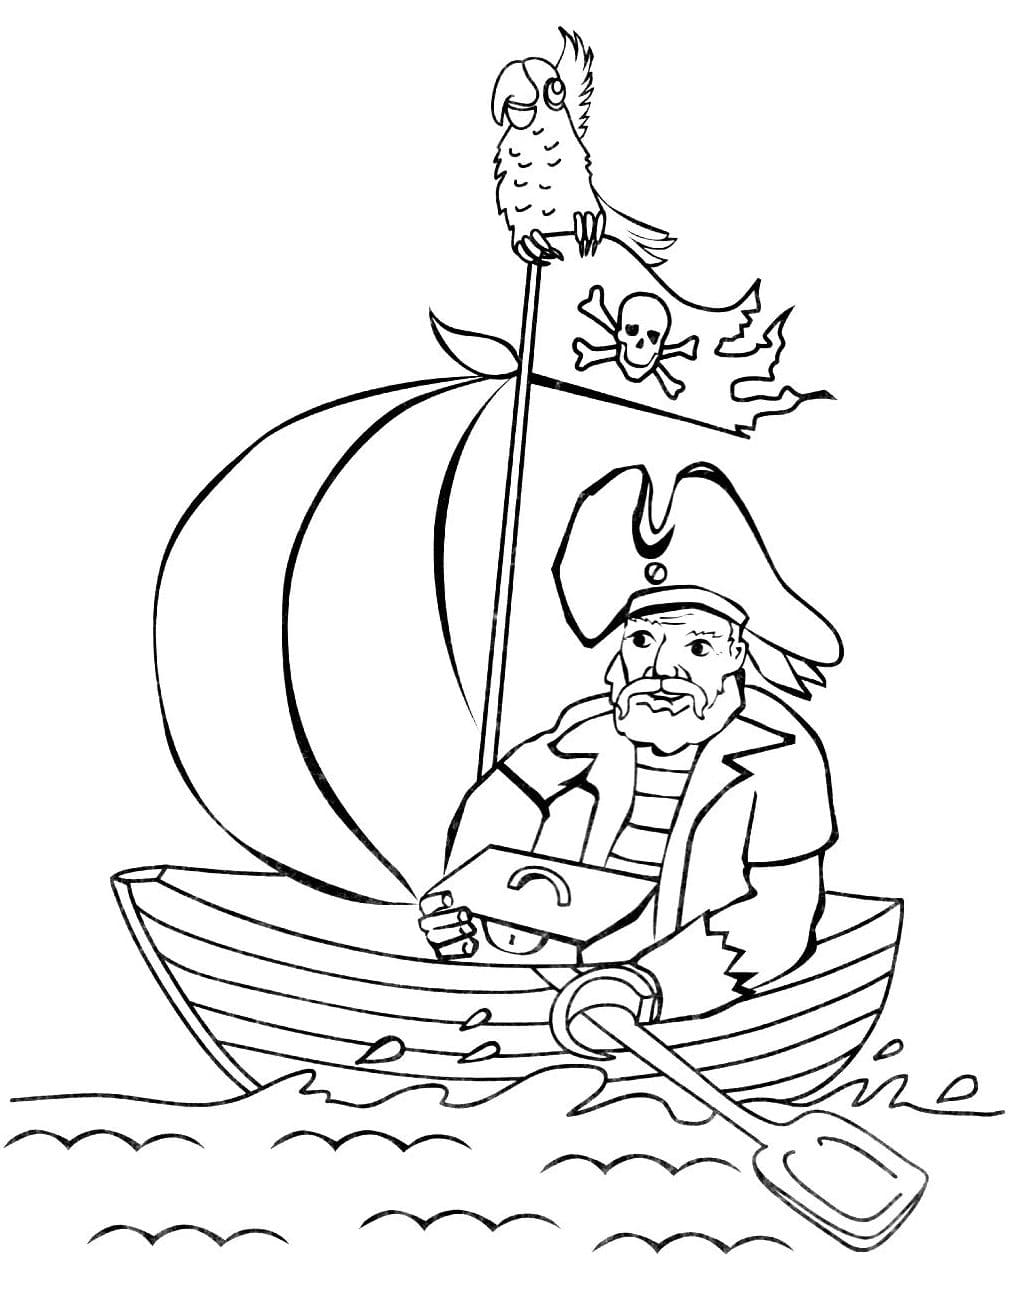 Coloring page Pirates A pirate and a parrot on a boat